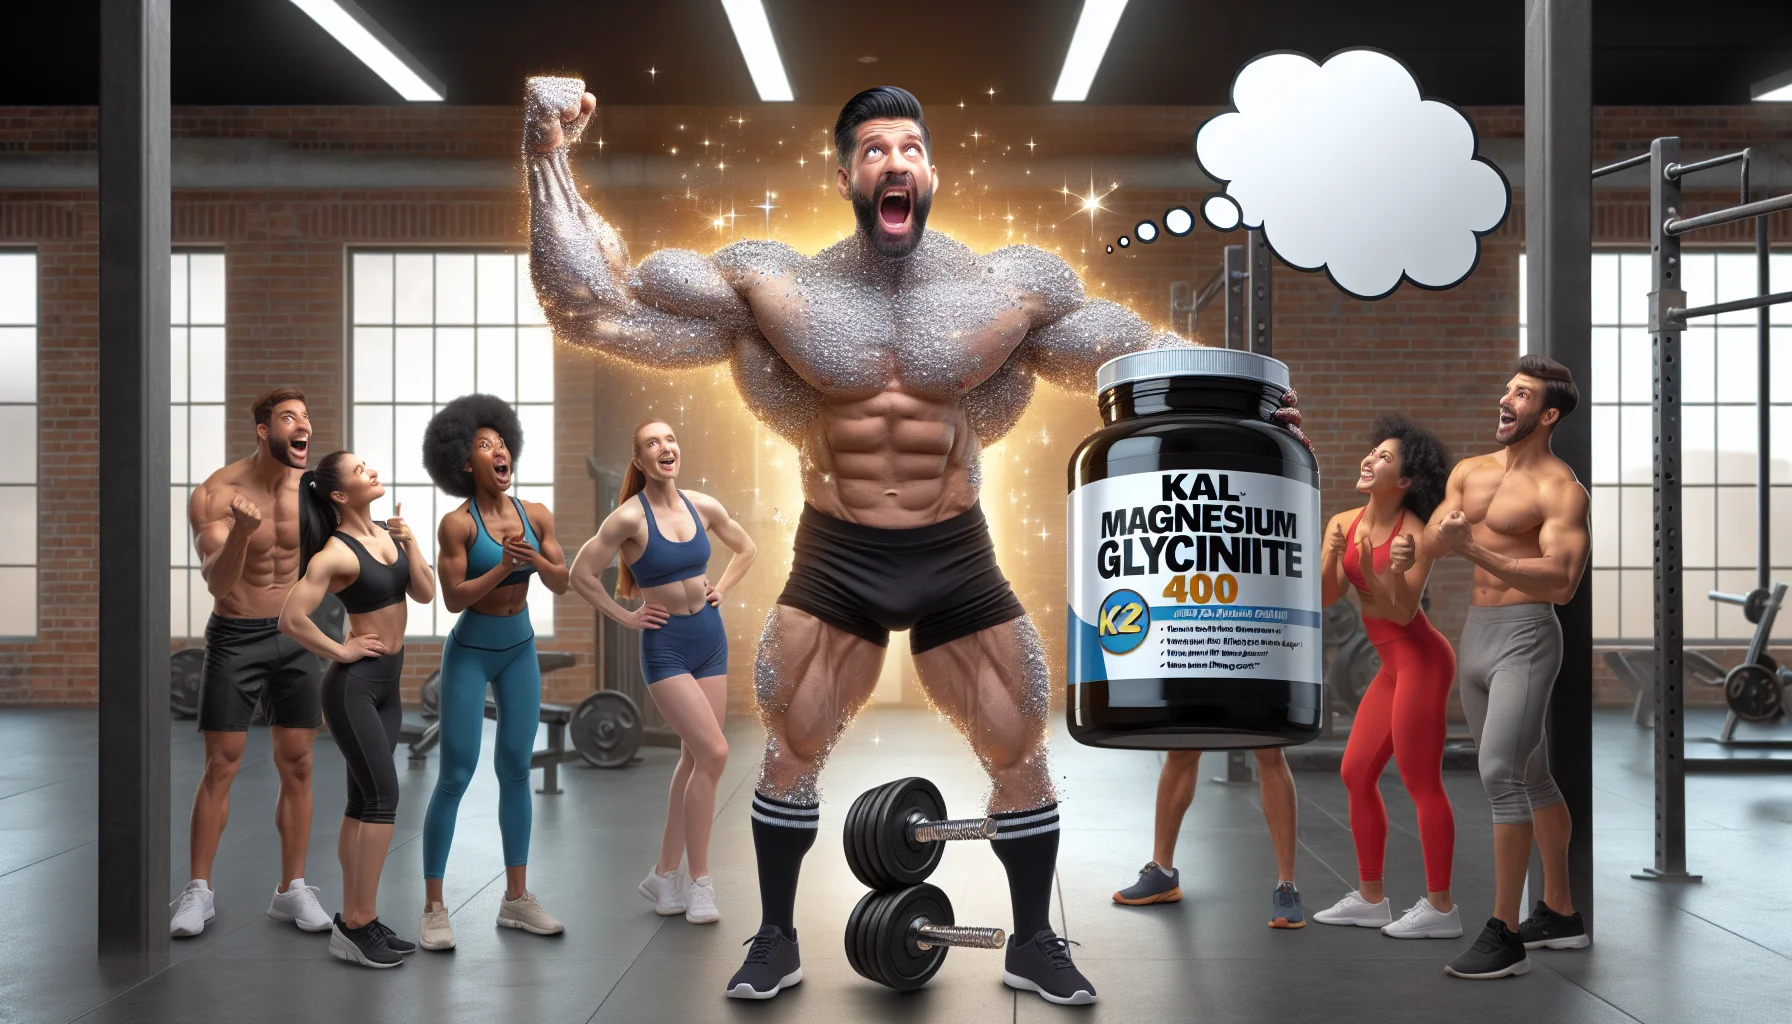 Create an imaginative scene where a person dressed as a bodybuilder is standing in a gym, holding a giant bottle of 'Kal Magnesium Glycinate 400' in one hand as if it were a dumbbell. The bodybuilder is Caucasian male, full of energy and enthusiasm. In the other hand, he is showing a thumbs up. The bottle is sparkling, indicating it's magical or special. There are some athletic people in the background, of varied descents like Black, Hispanic, Middle-Eastern, and South Asian, looking amazed and with speech bubbles saying 'I need that supplement!', making the scenario enticing and humorous.